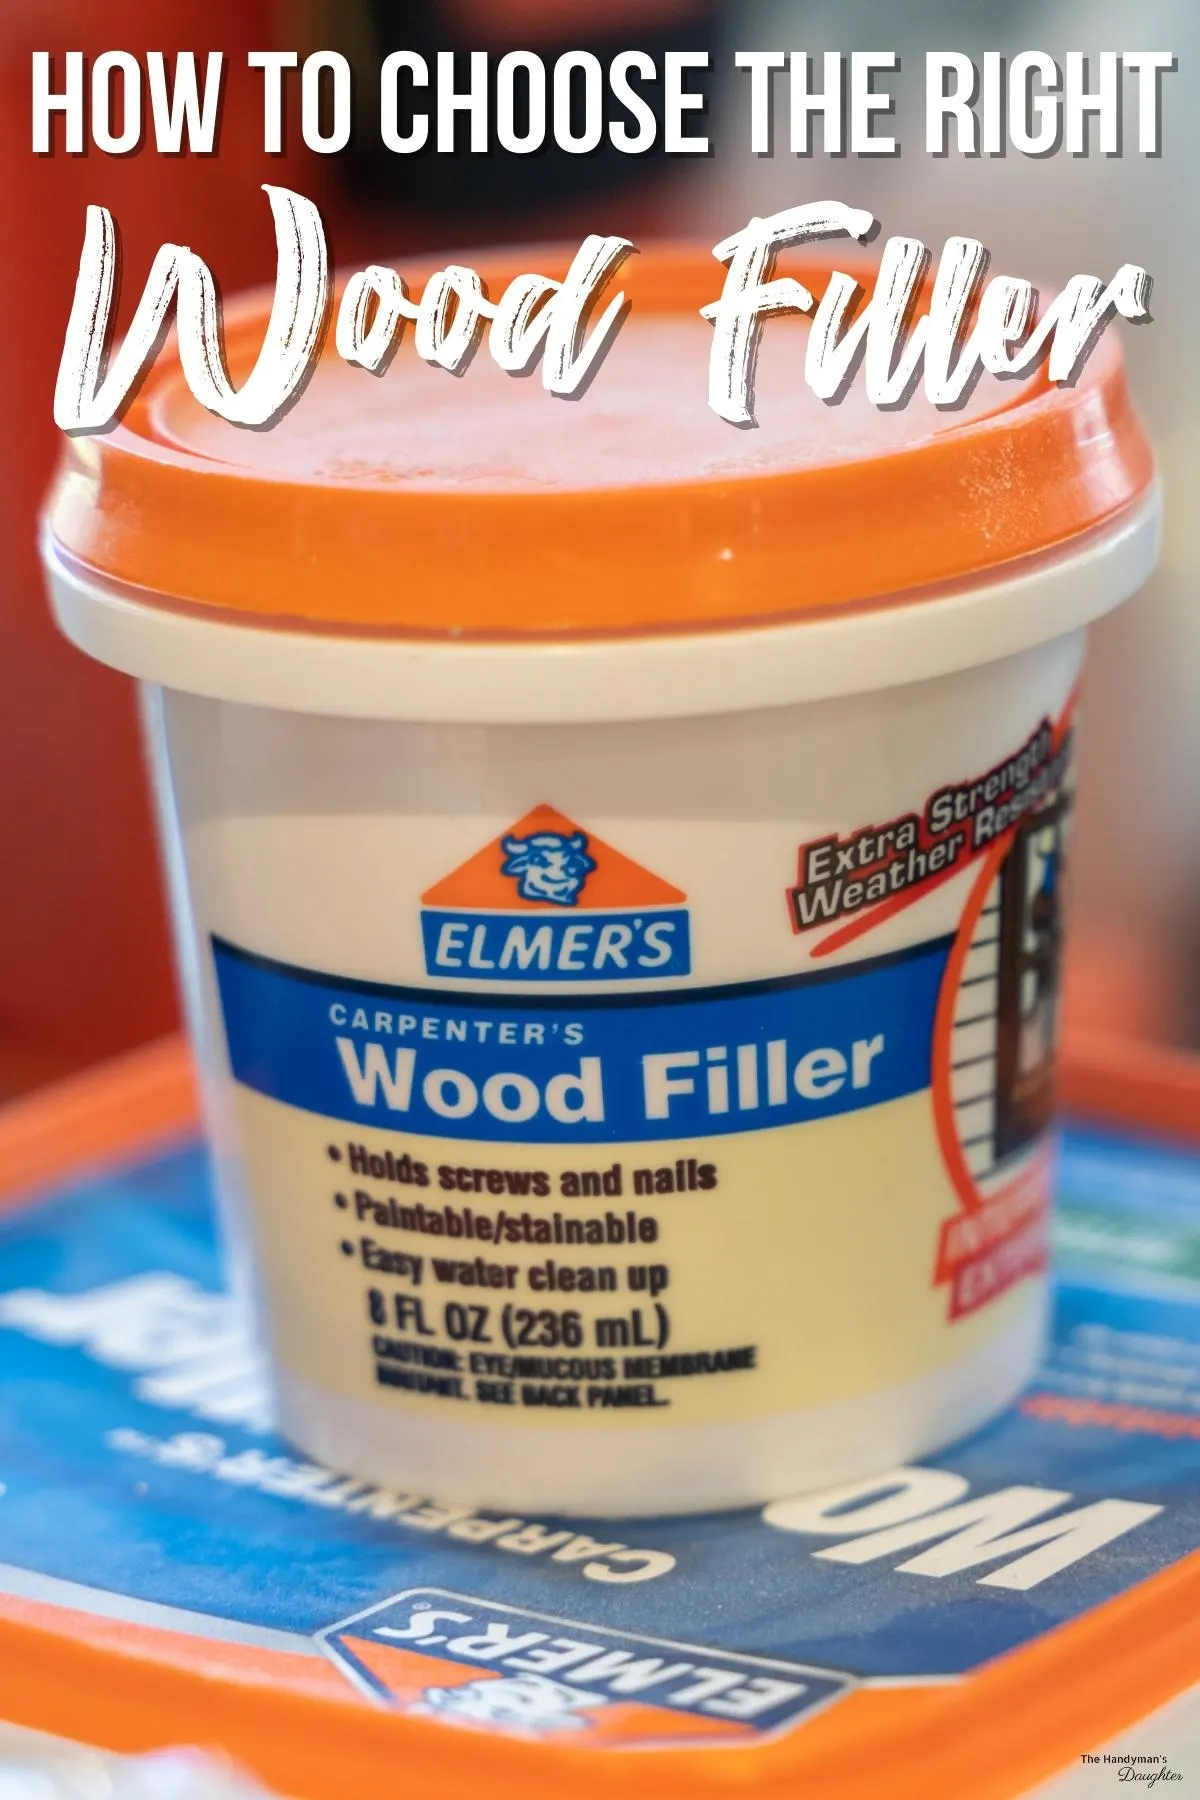 Water-Based Wood & Grain Filler, Replace Every Filler & Putty